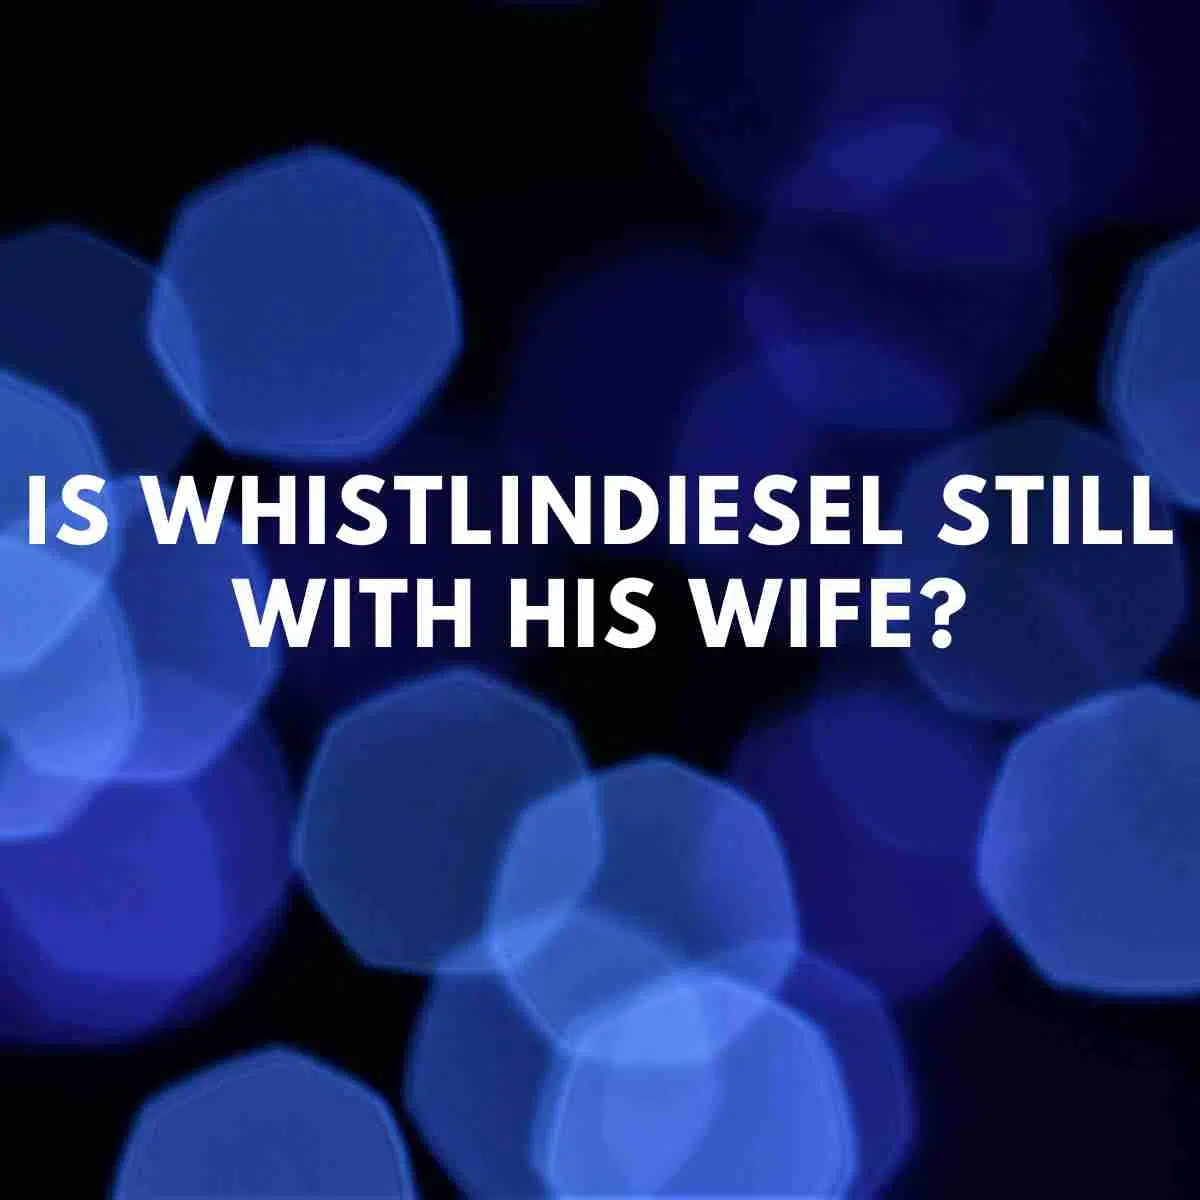 Is WhistlinDiesel still with his wife